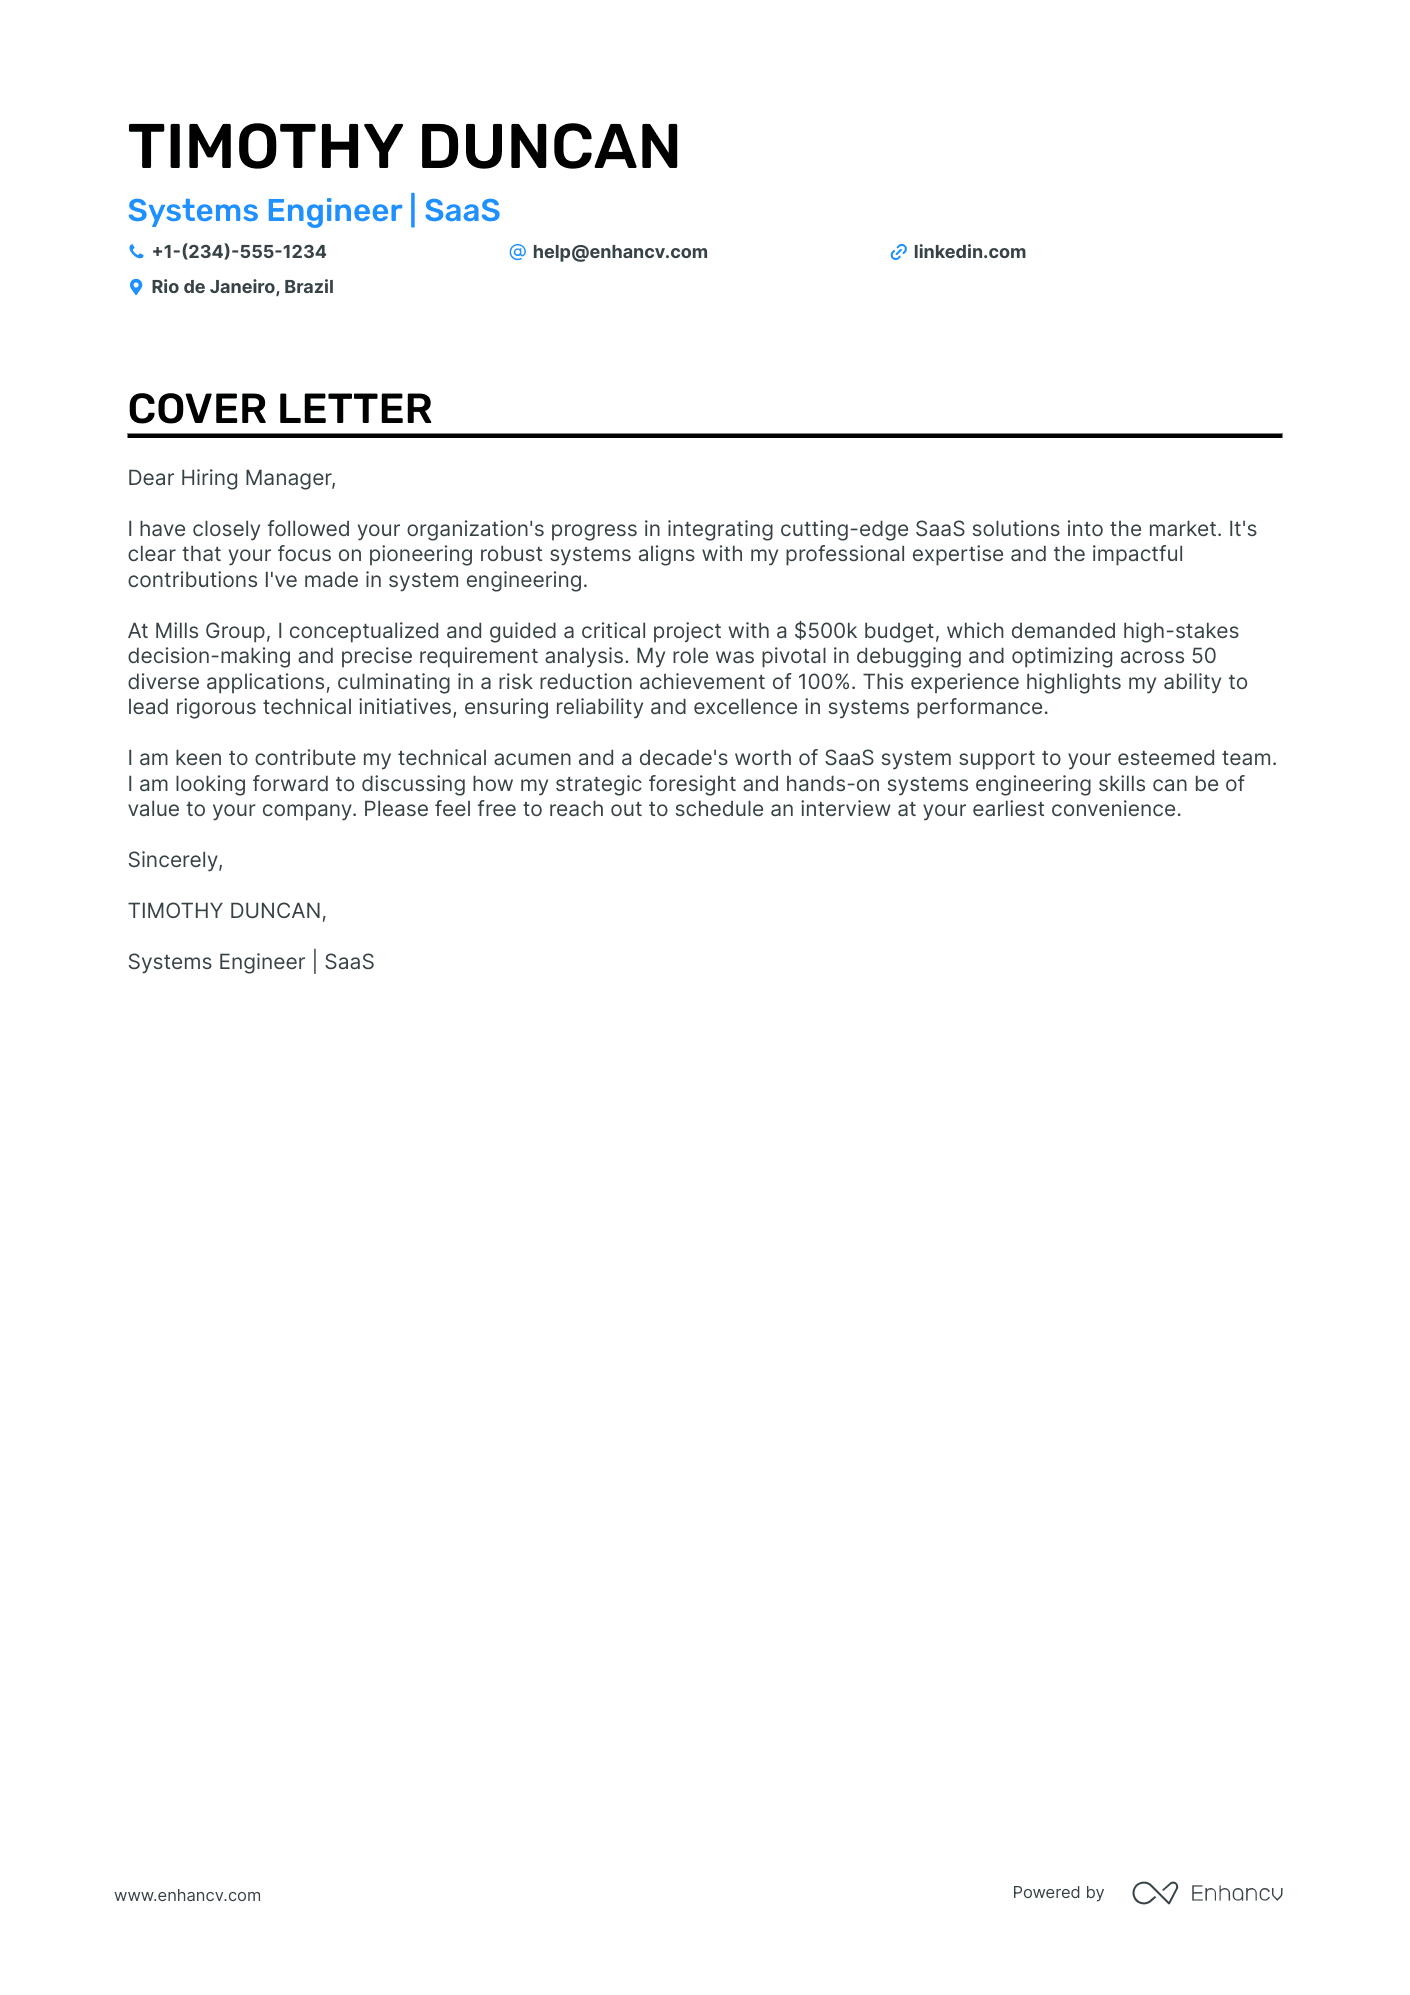 Systems Engineer cover letter